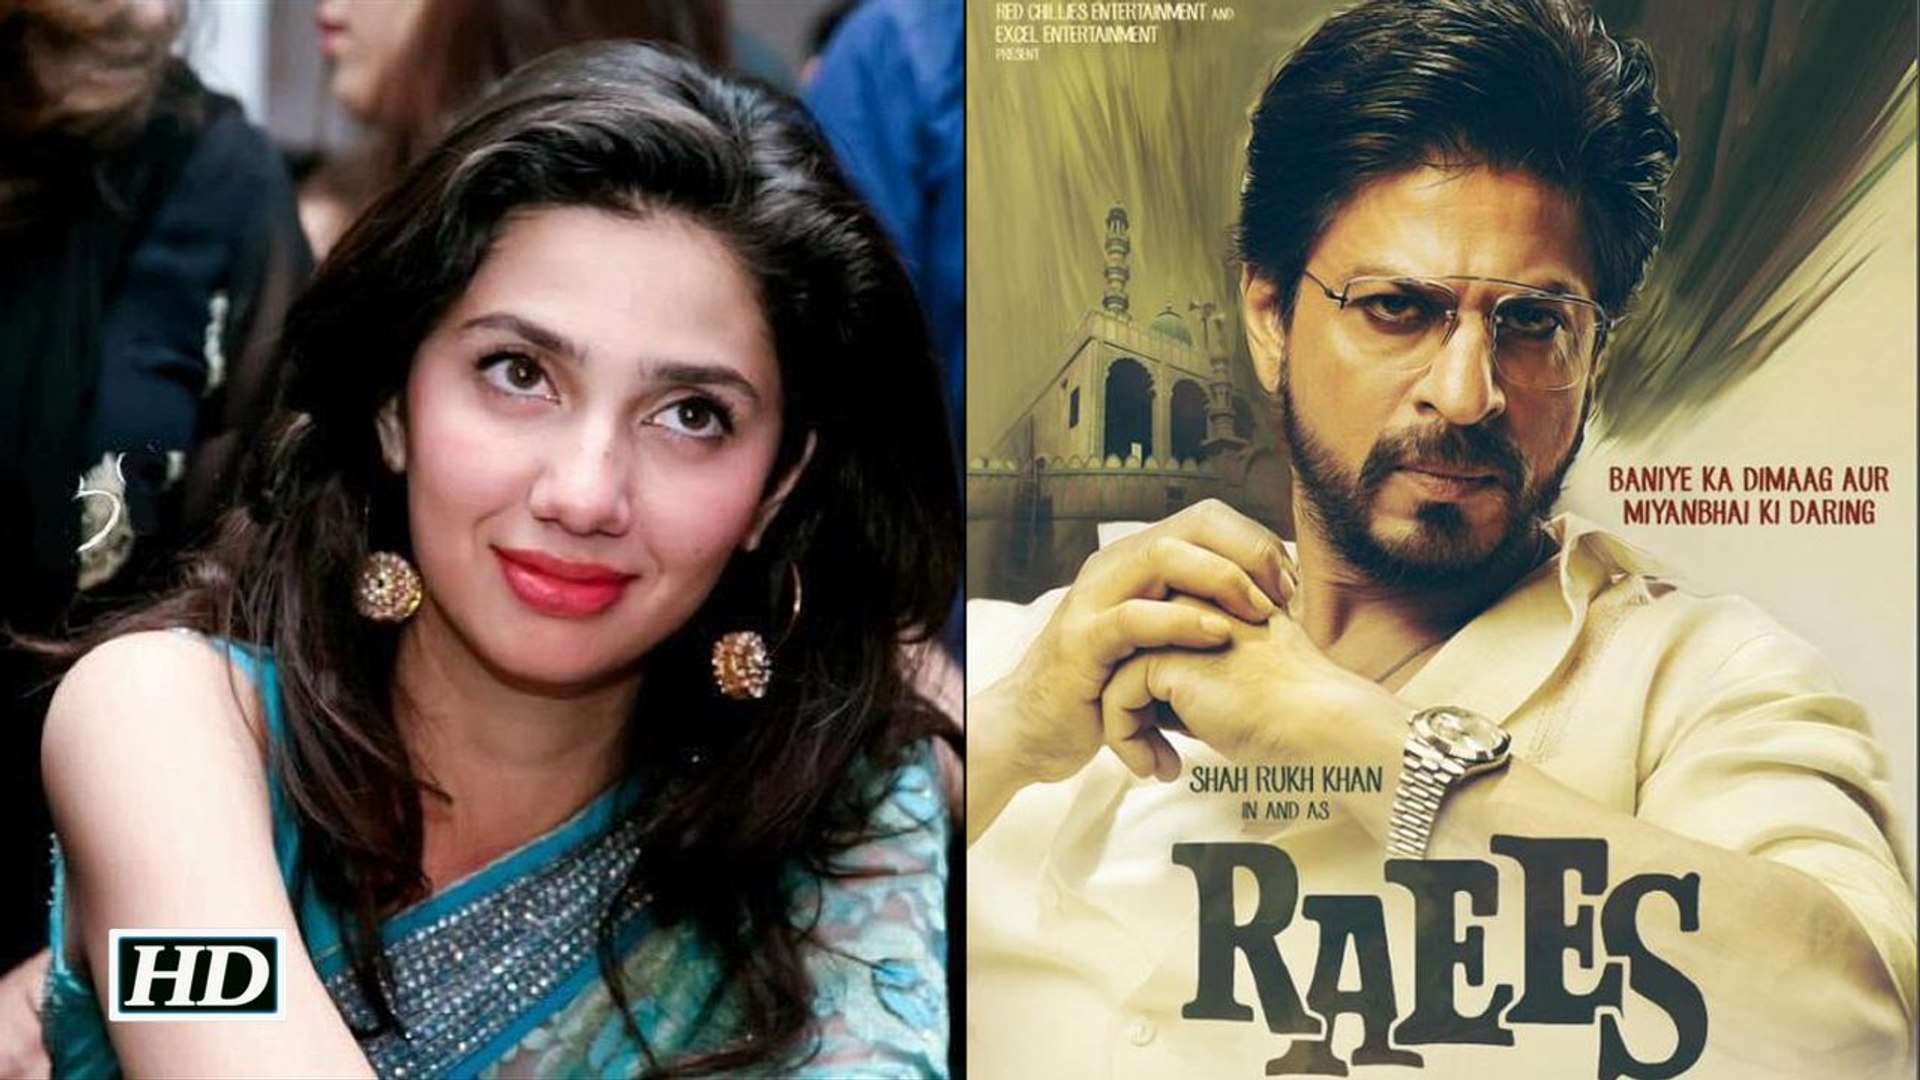 RAEES Trailer Brings smile on Mahira Khan's face | Watch how - video  Dailymotion